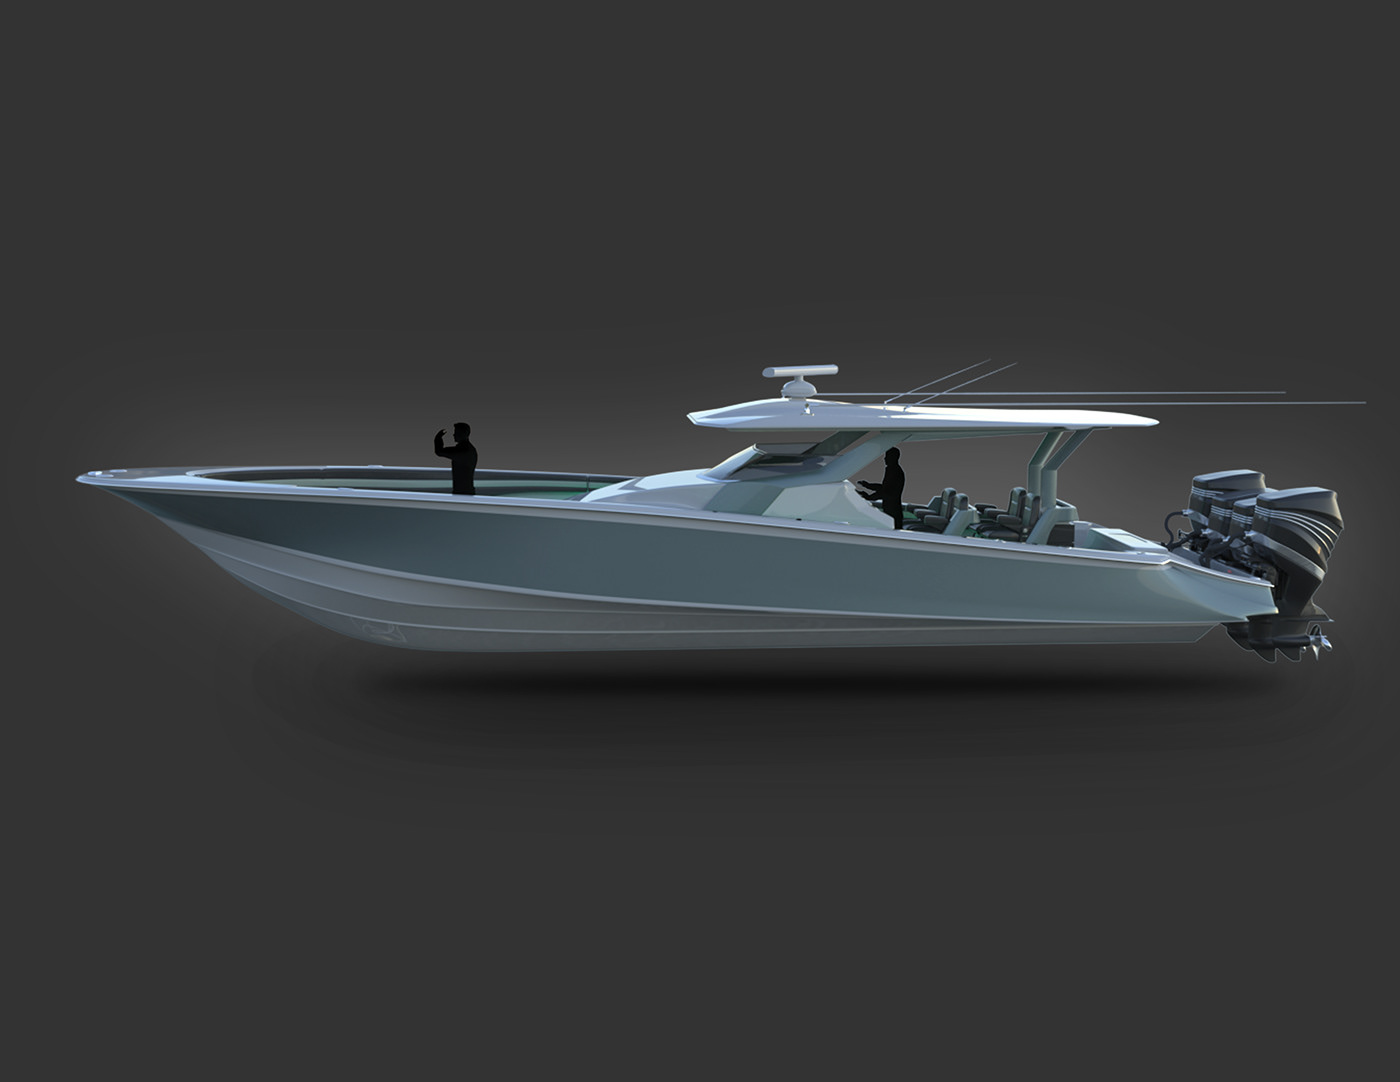 Boat Concept boat design Yacht Design yacht Power Boat yacht concept Boat Concept yacht renders center console offshore